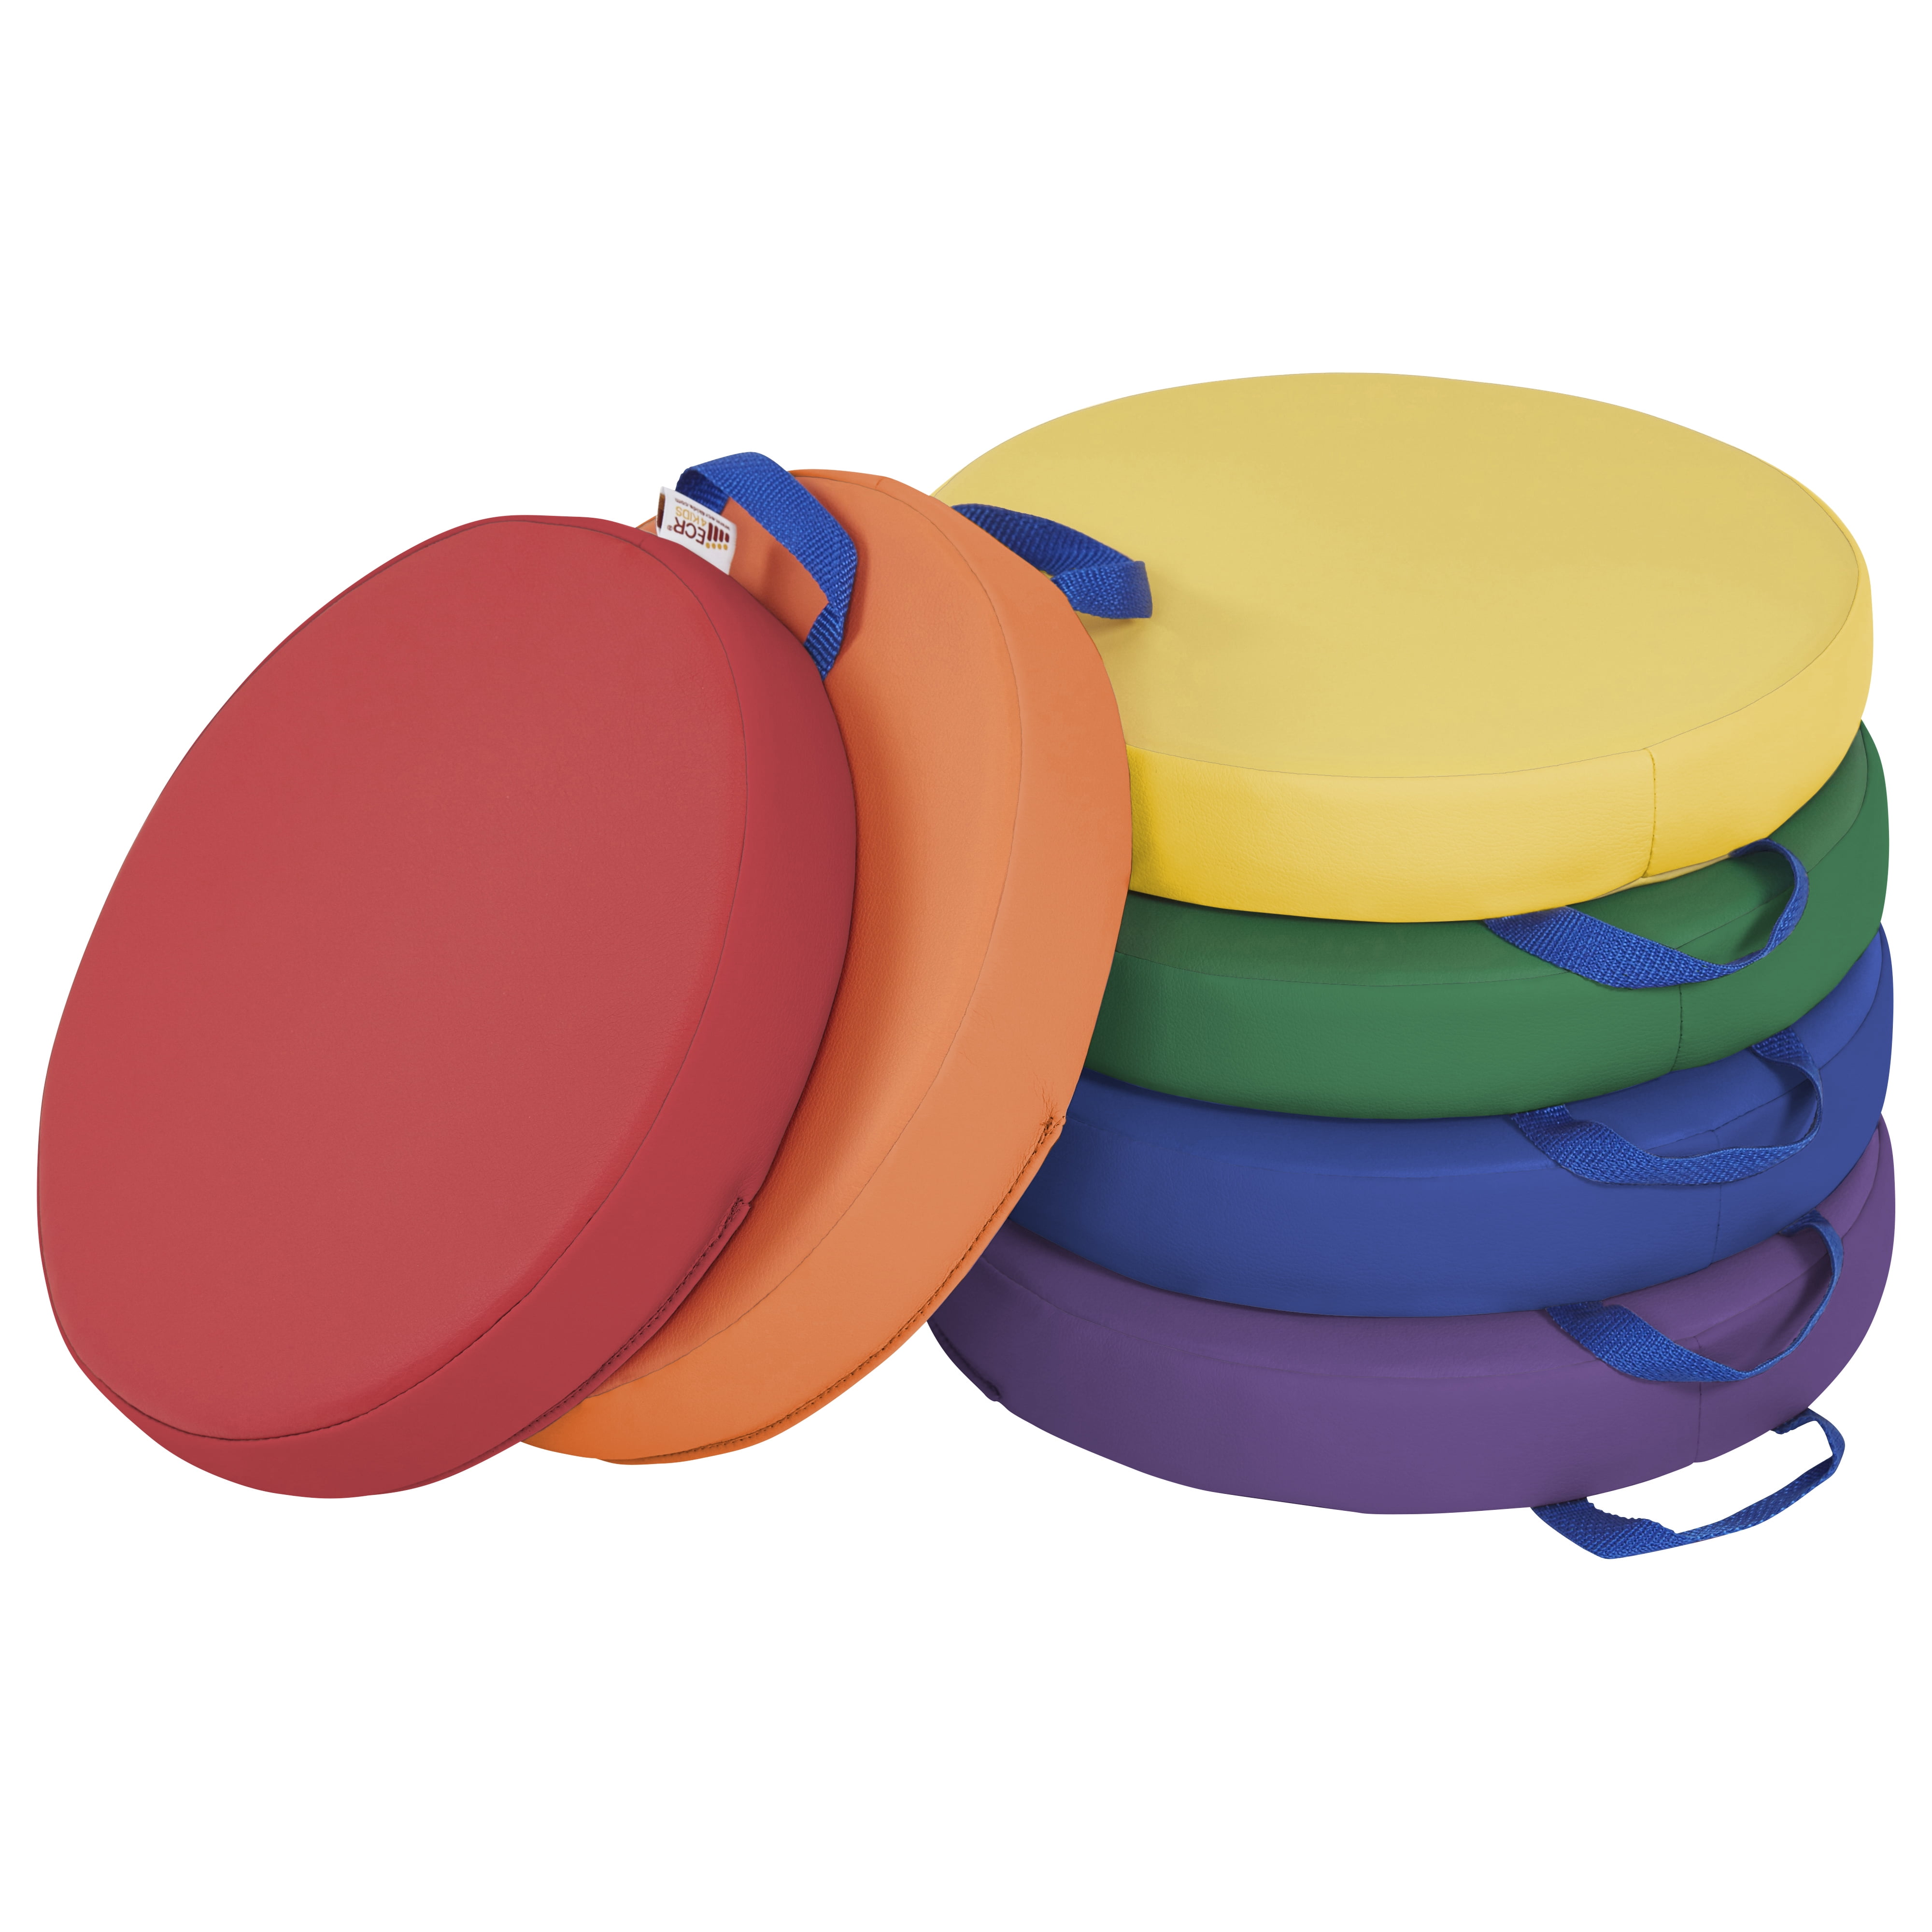 Buy Round Floor Cushions With Handle Set at S&S Worldwide